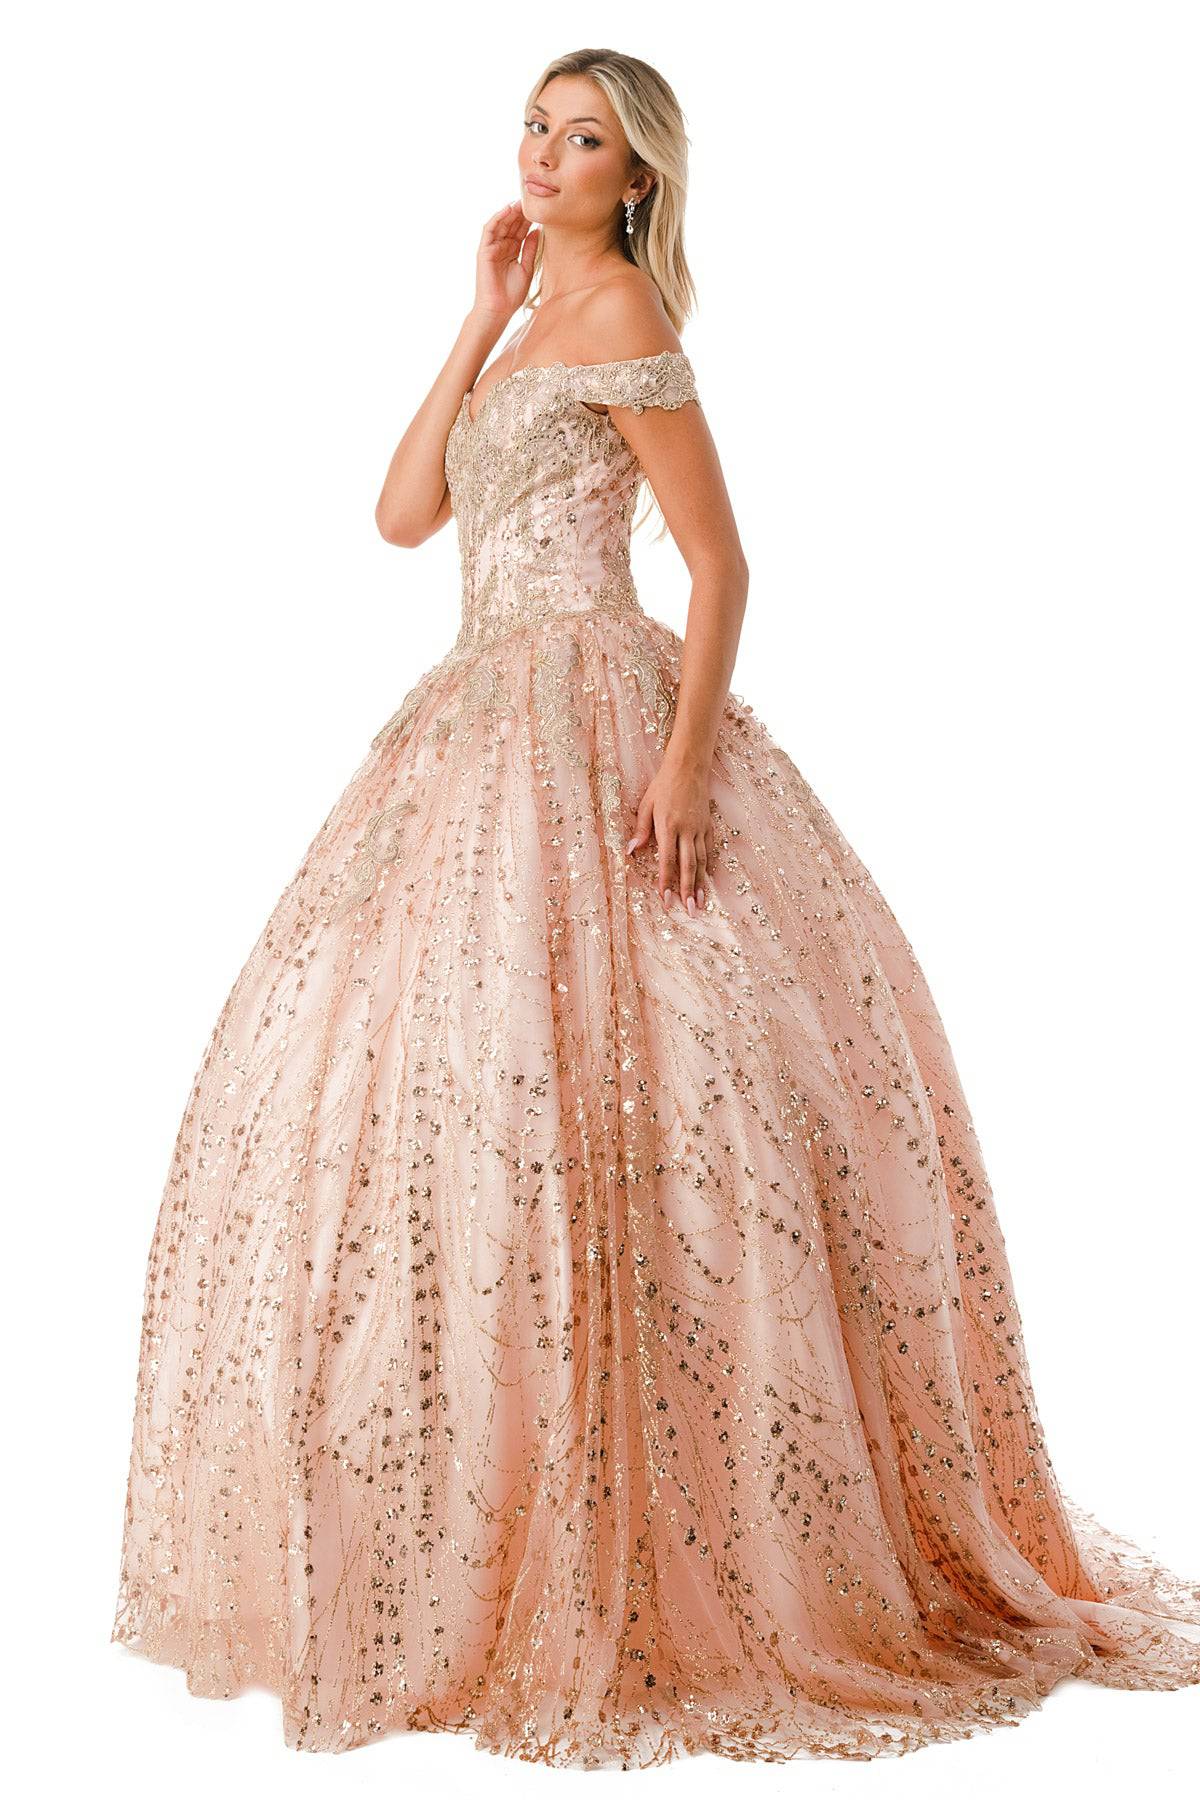 Aspeed L2753T Stunning Seqin Embroidered Quinceanera Dress - NORMA REED